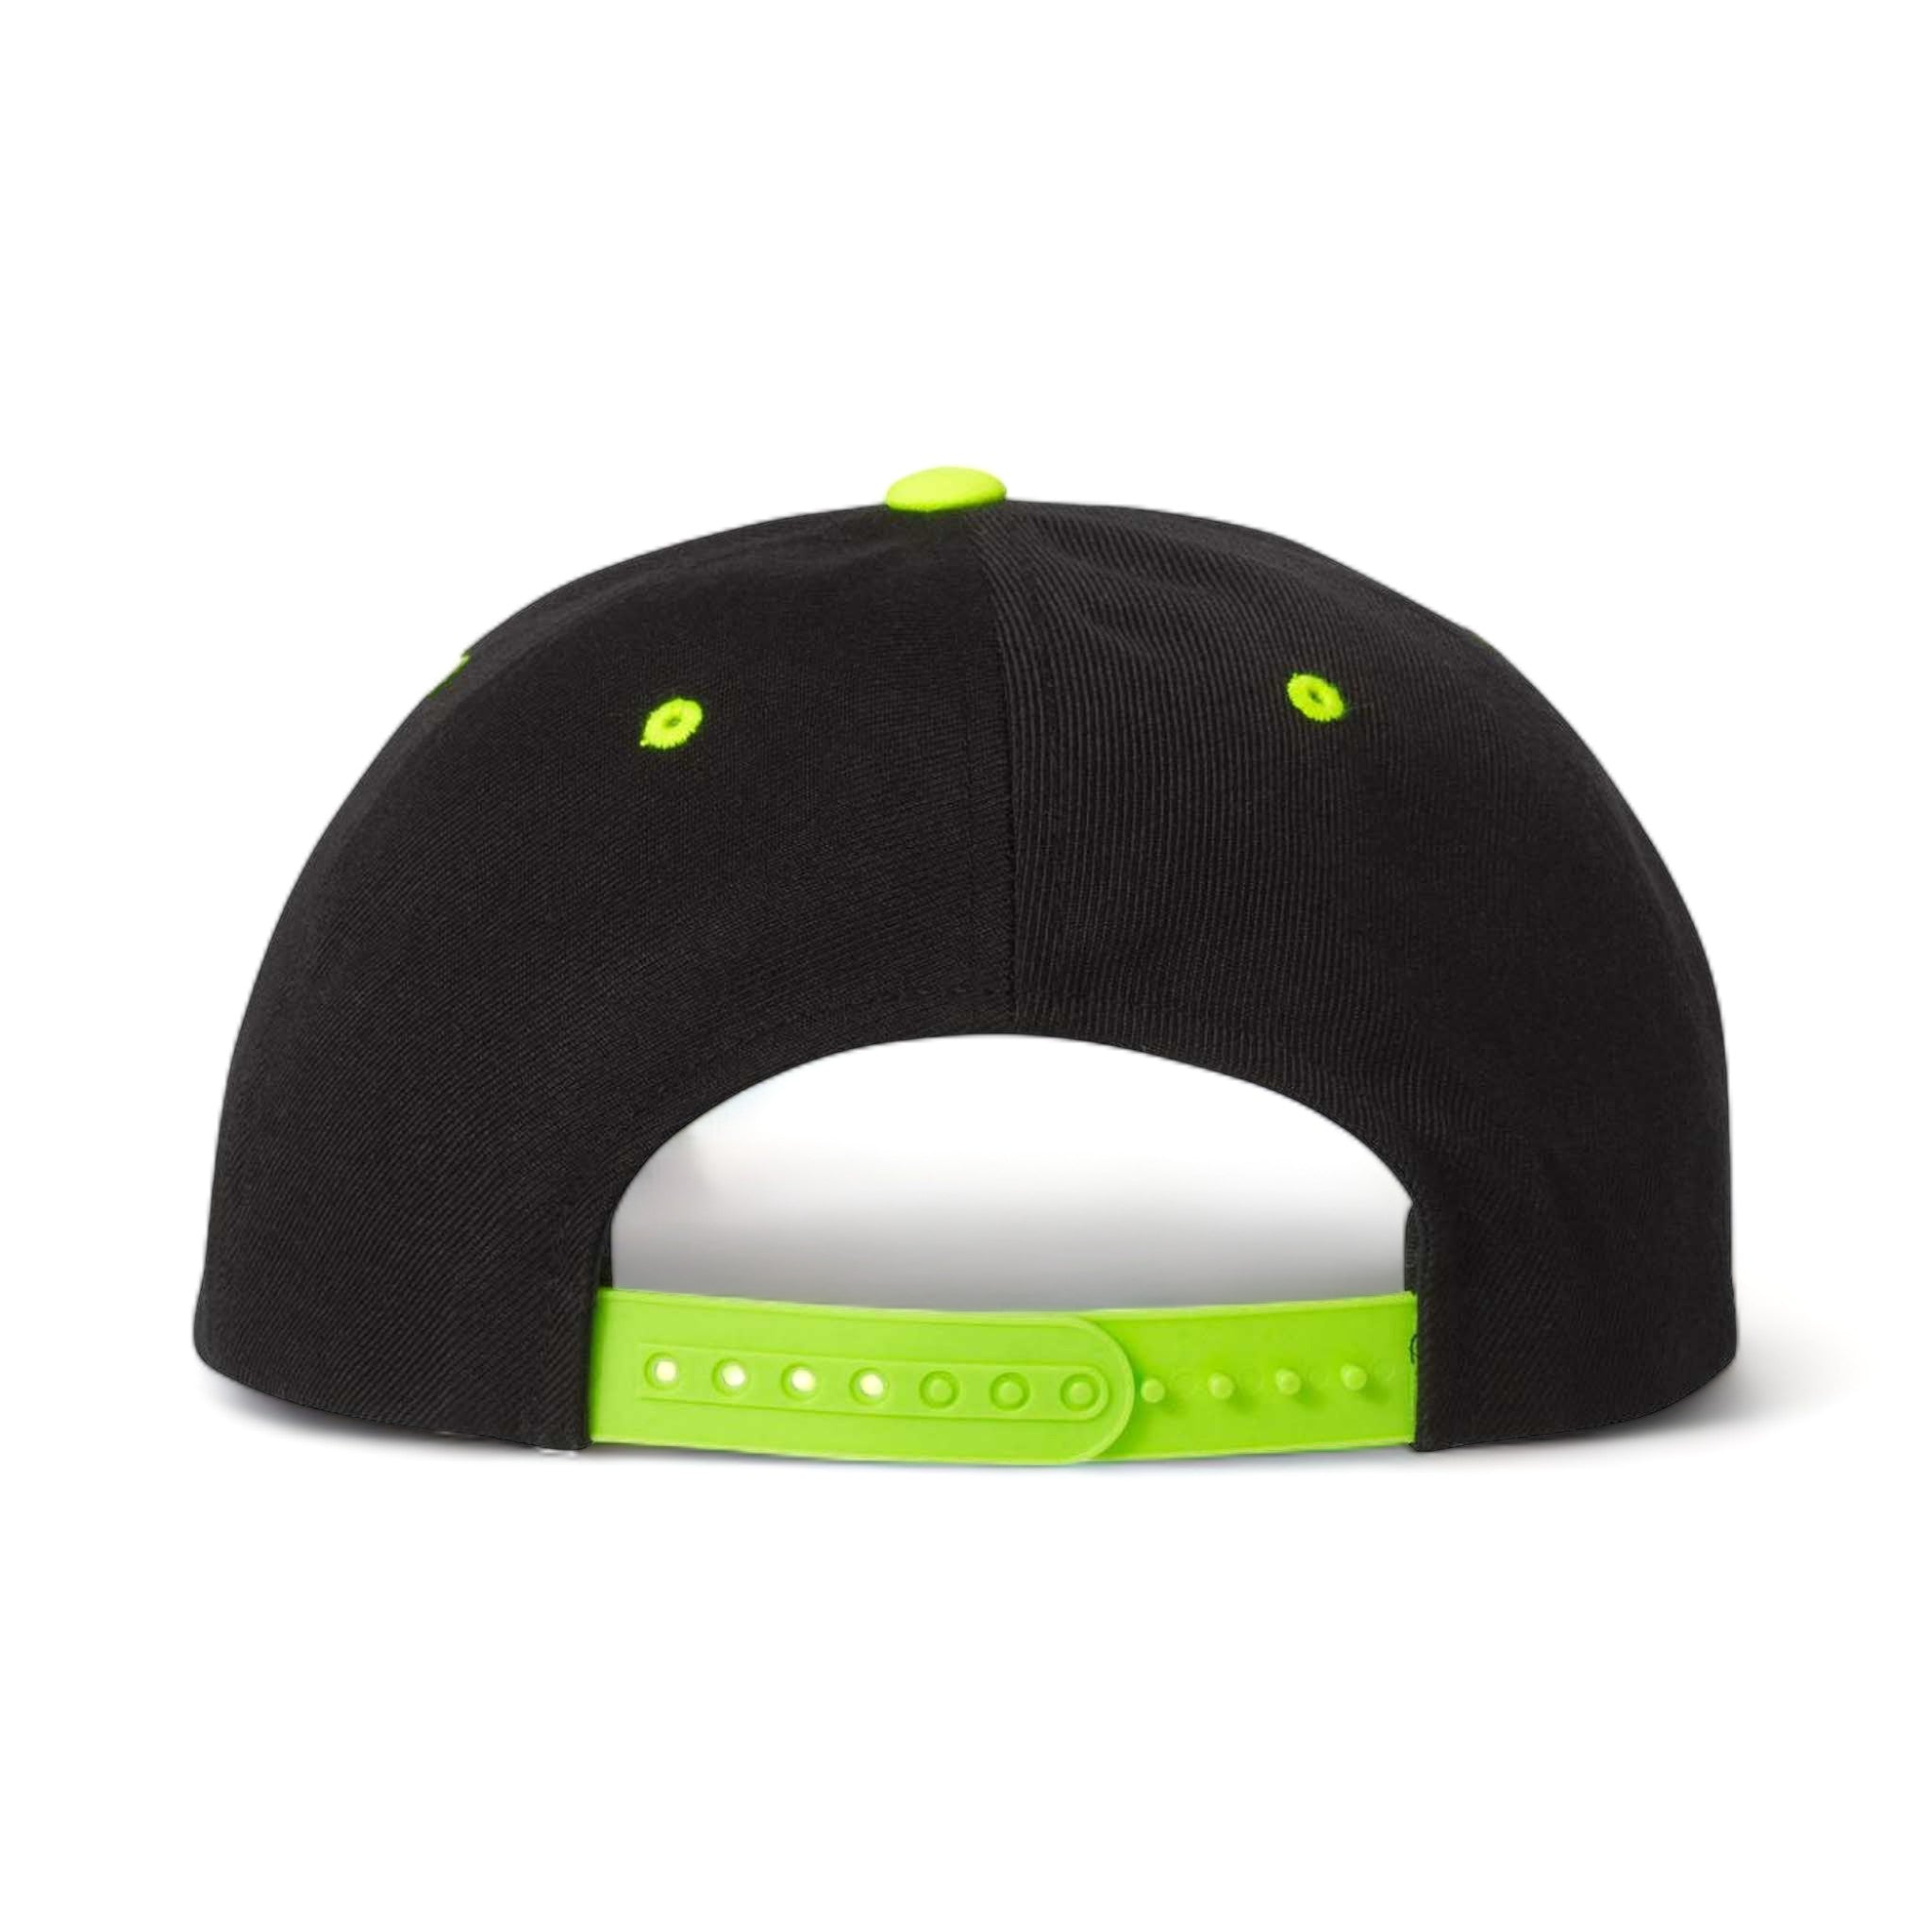 Back view of YP Classics 6089M custom hat in black and neon green